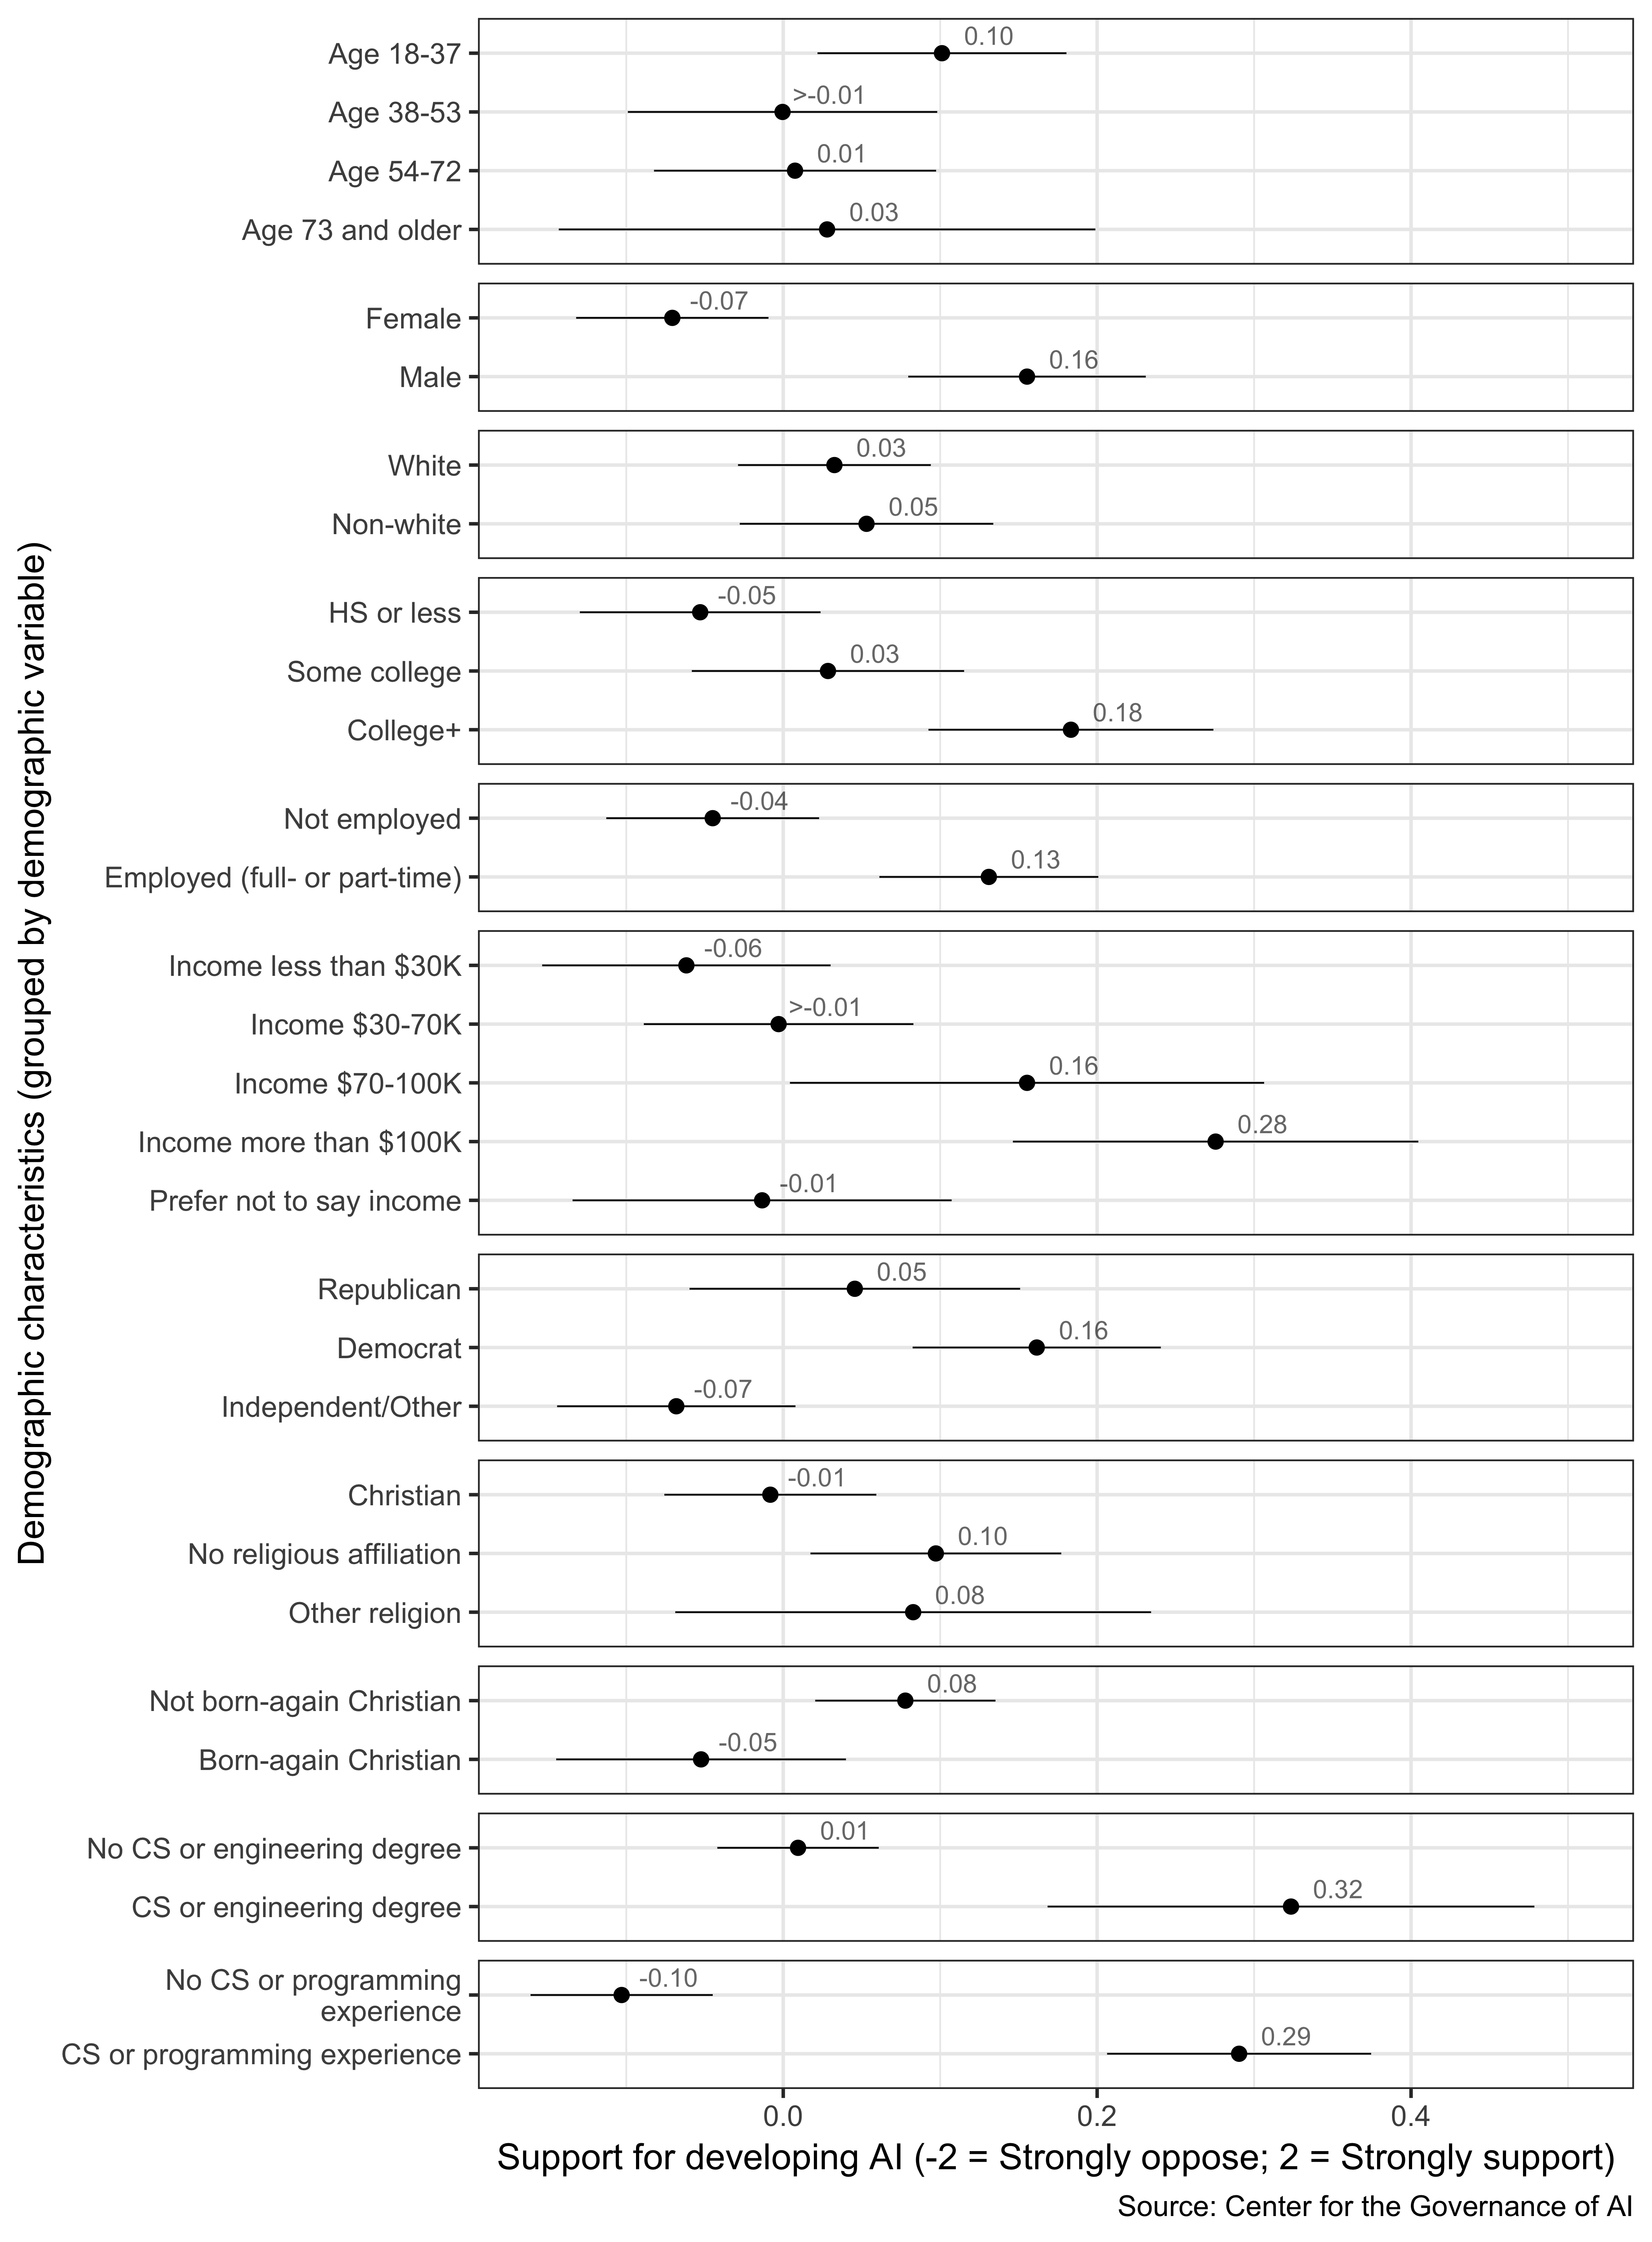 Support for developing high-level machine intelligence across demographic characteristics: average support across groups